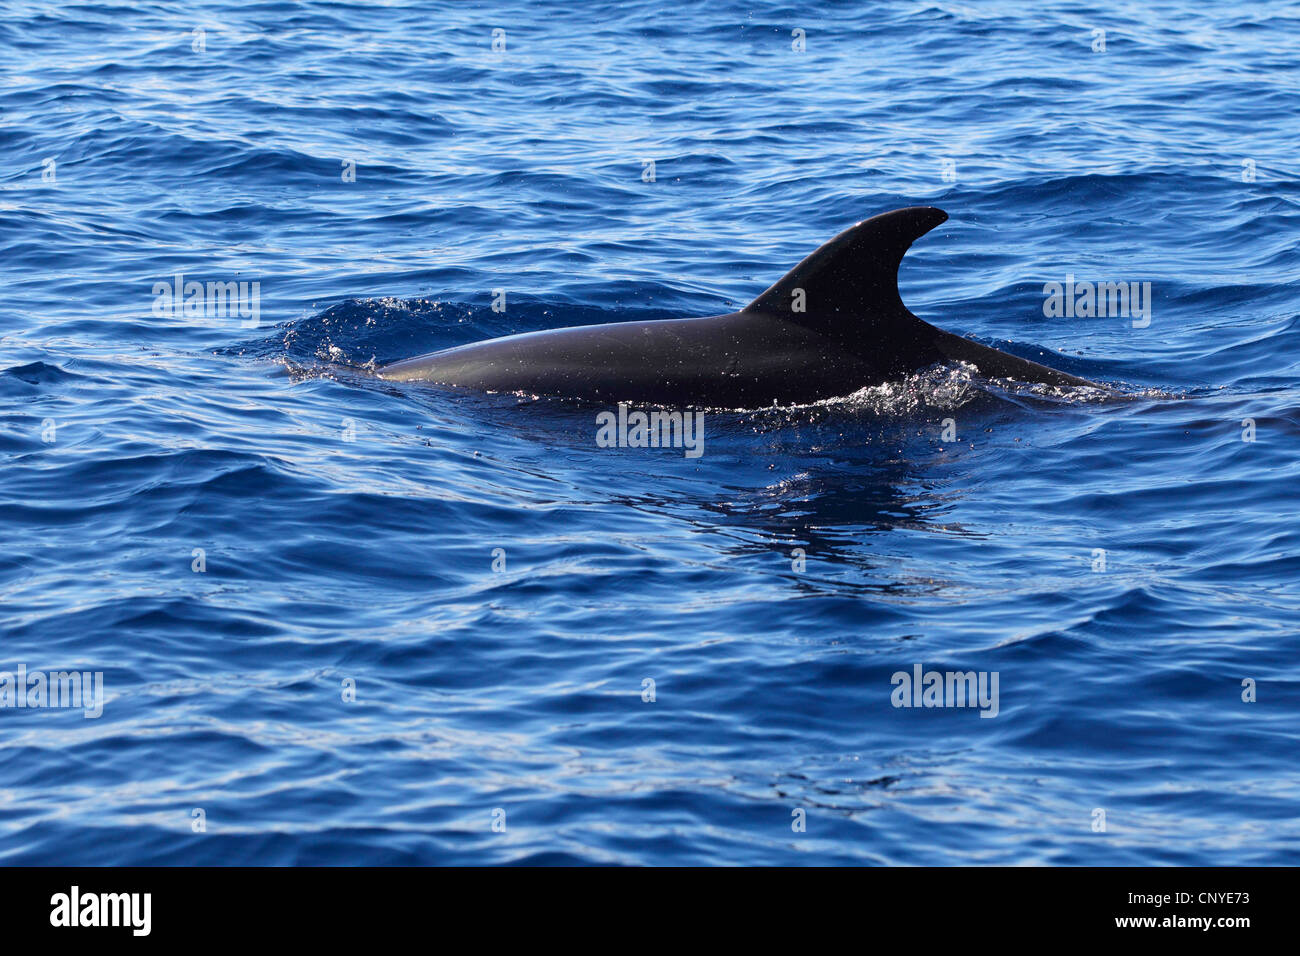 bottle-nose dolphin, bottlenosed dolphin, common bottle-nosed dolphin (Tursiops truncatus), swimming at the water surface Stock Photo